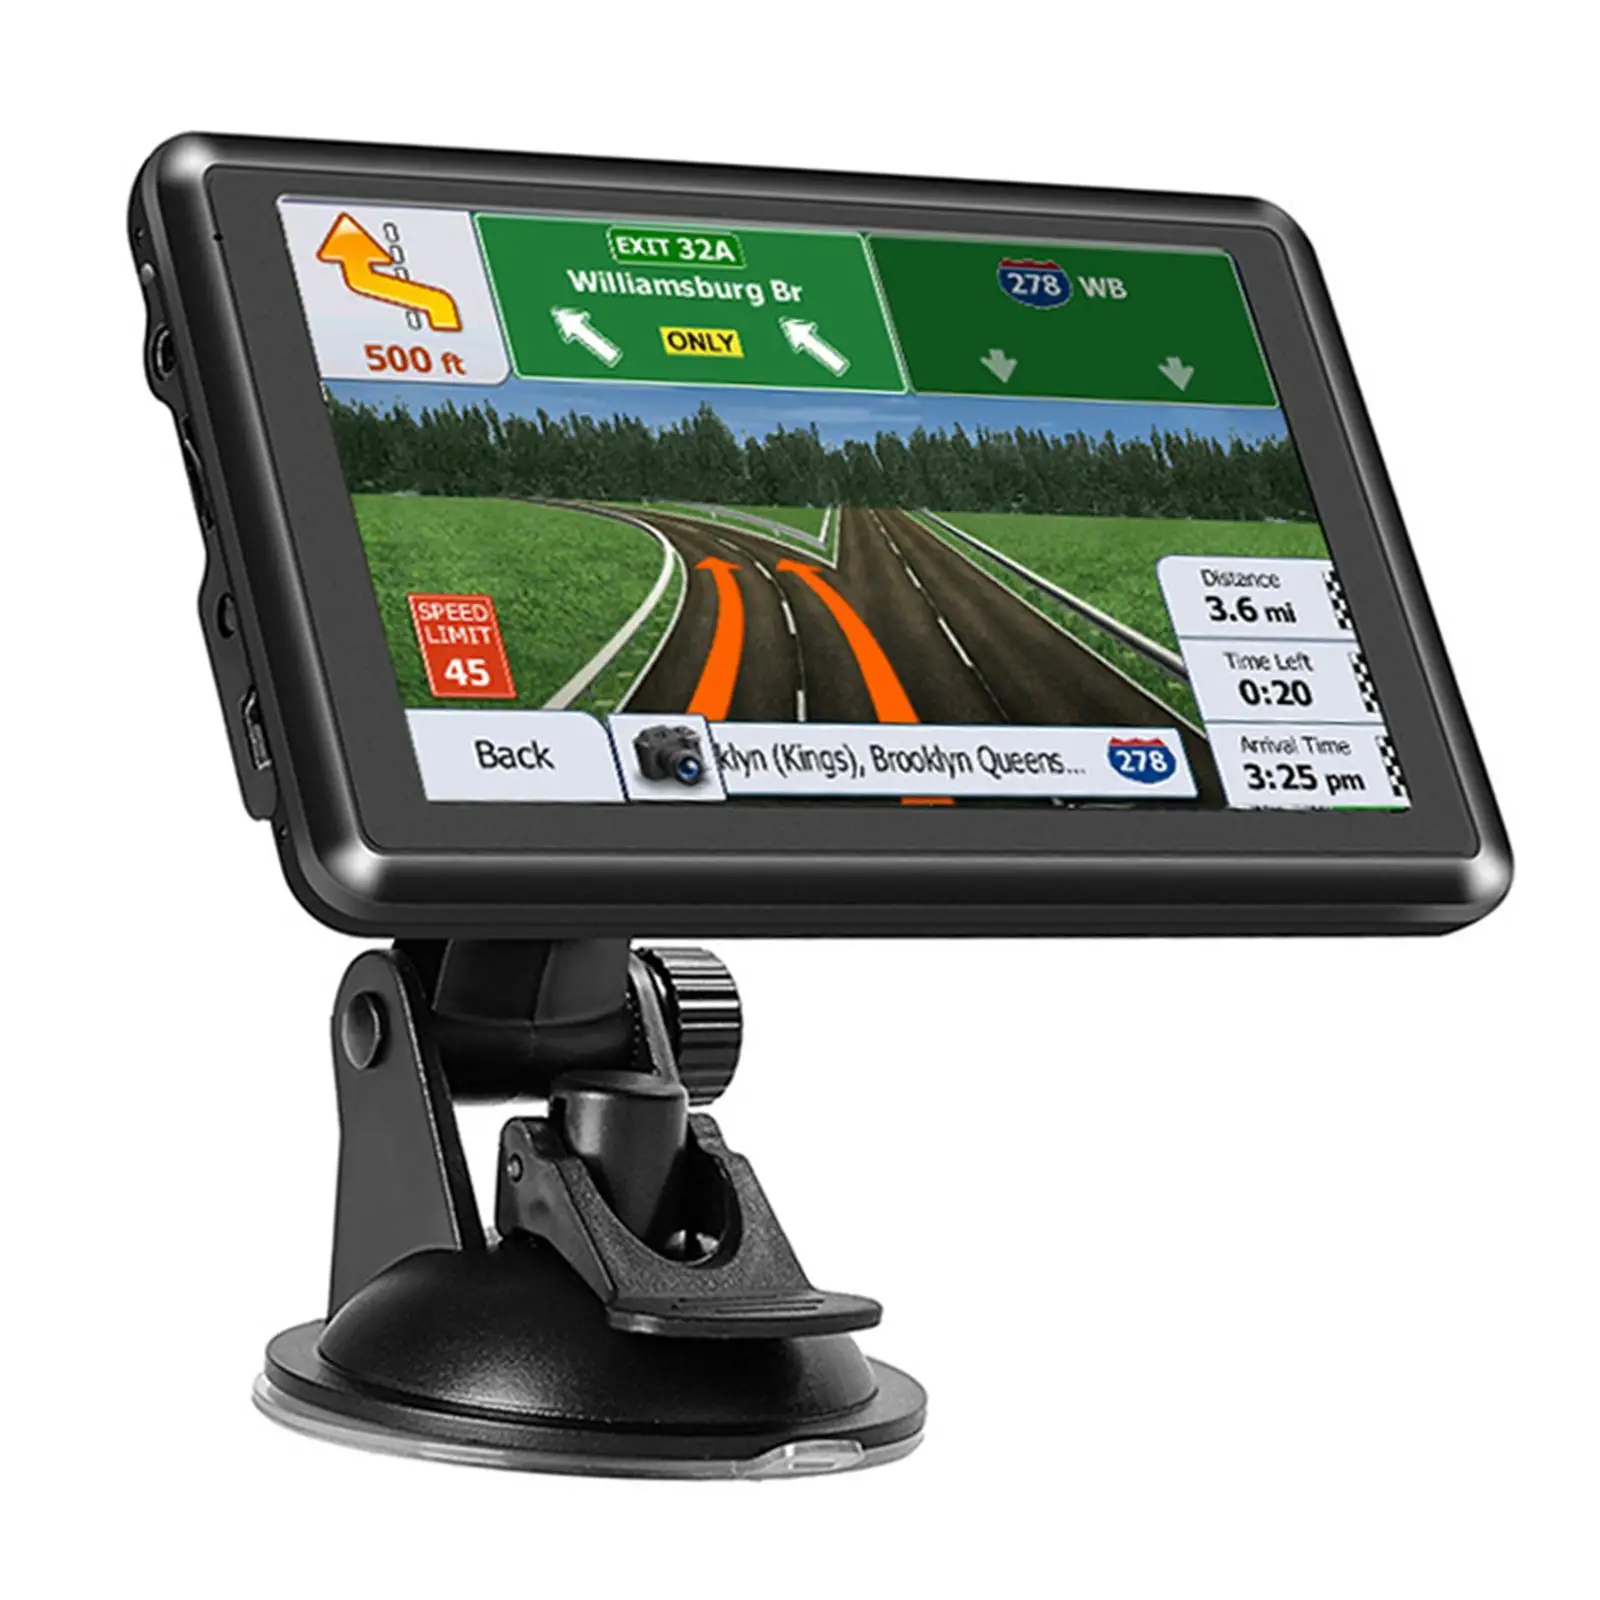 GPS Navigator 5 inch Touch Screen High Resolution Maps 8GB 128 MB Spoken Direction GPS Device Truck GPS Navigation System